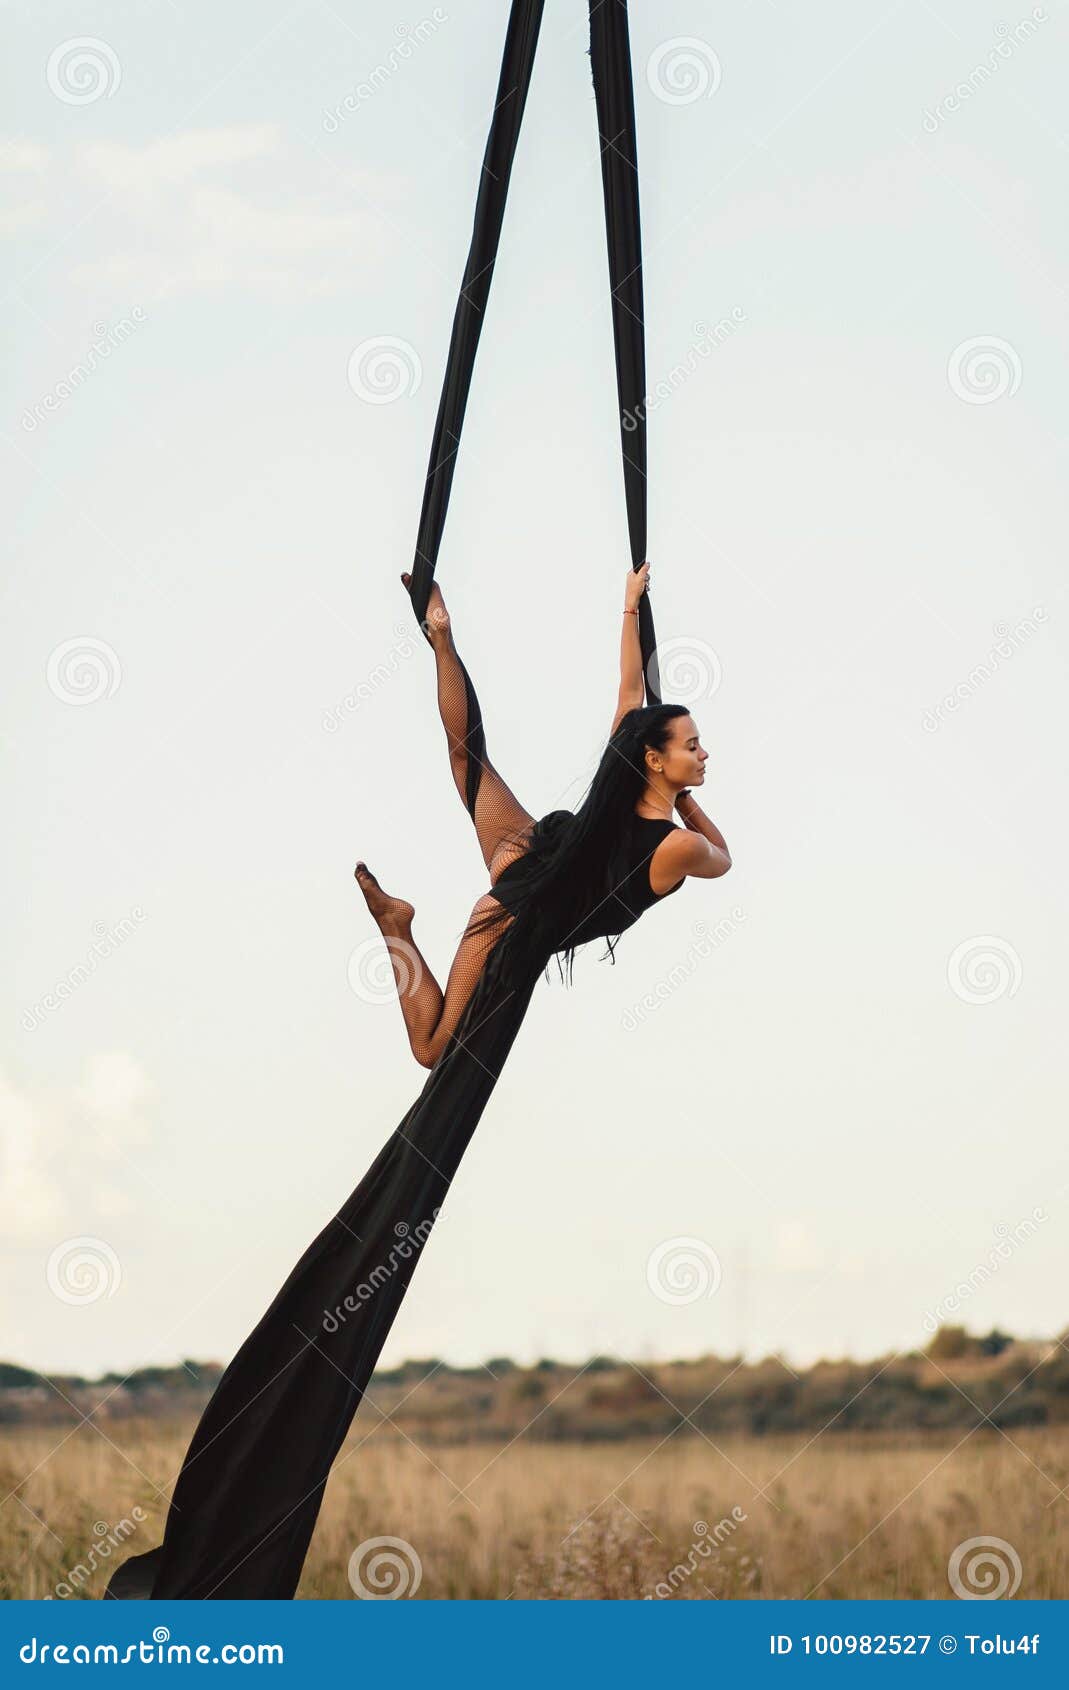 Elegance Young Beautiful Woman Dance with Aerial Silk on a Sky Background.  Fly Yoga Sport Stock Image - Image of aerialist, figure: 100982527